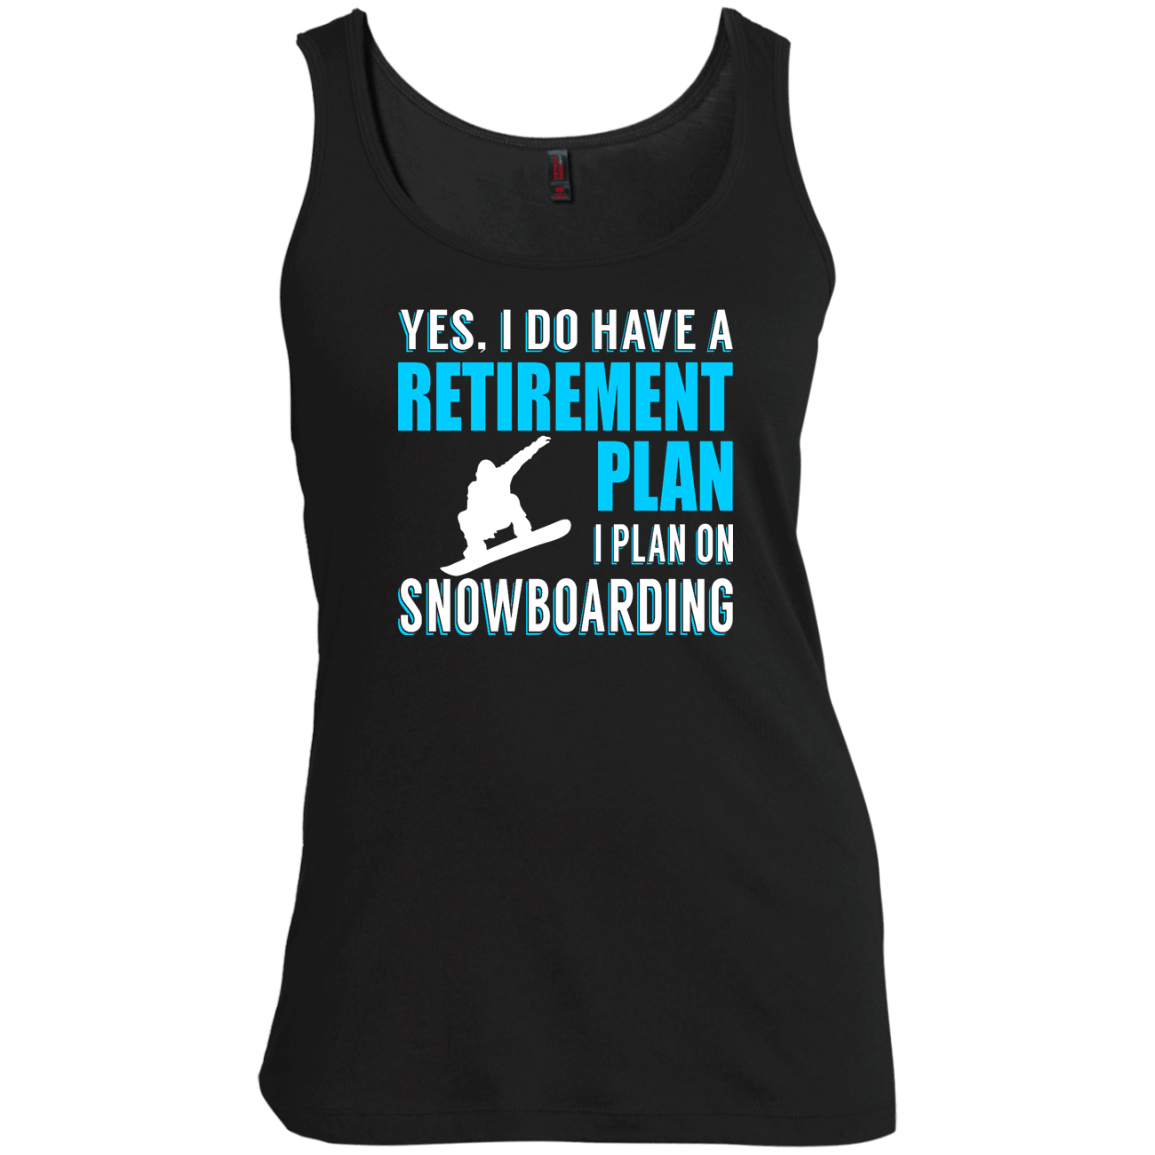 Yes, I Do Have A Retirement Plan - I Plan On Snowboarding Tank Tops - Powderaddicts